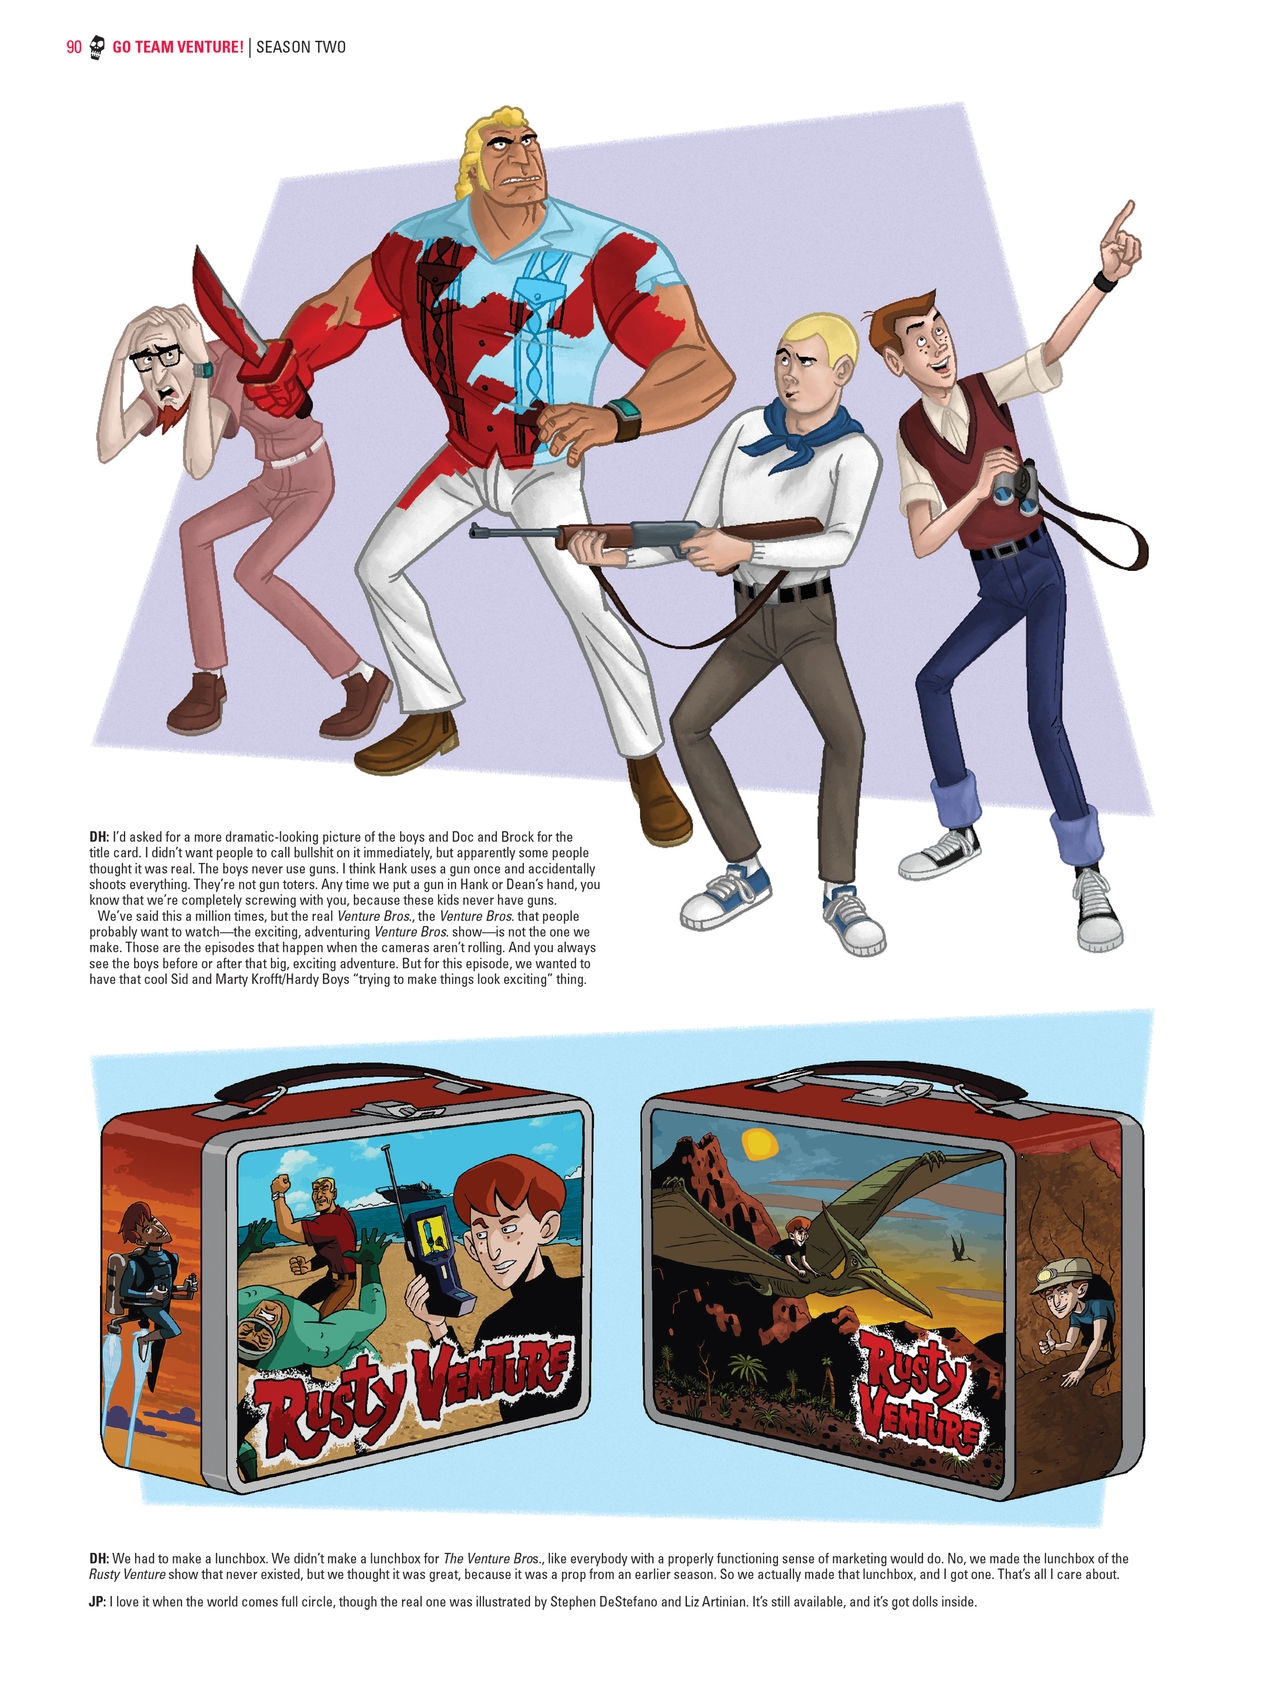 Go Team Venture! - The Art and Making of the Venture Bros 89